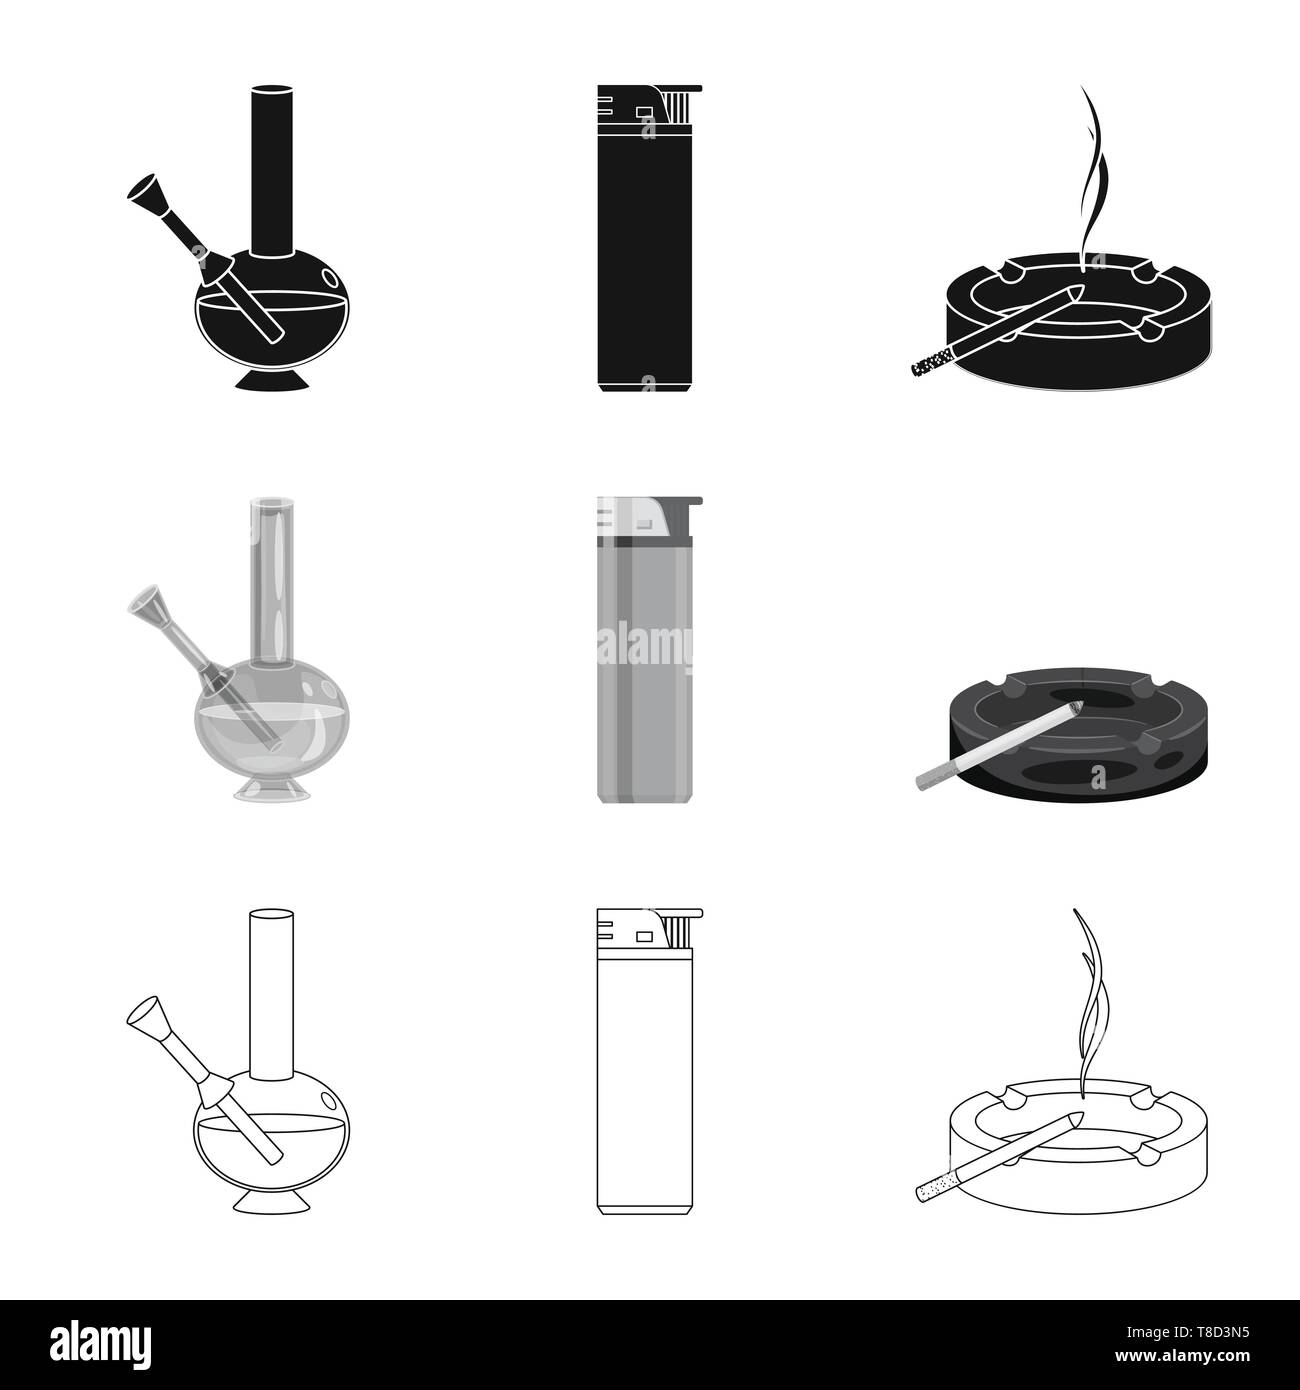 hookah,lighter,ashtray,bong,plastic,glass,metal,accessory,filter,pipe,flame,abuse,flask,burn,addict,chrome,addiction,capacity,blank,apparatus,blaz,refuse,stop,anti,habit,cigarette,tobacco,health,nicotine,smoke,statistics,set,vector,icon,illustration,isolated,collection,design,element,graphic,sign, Vector Vectors , Stock Vector